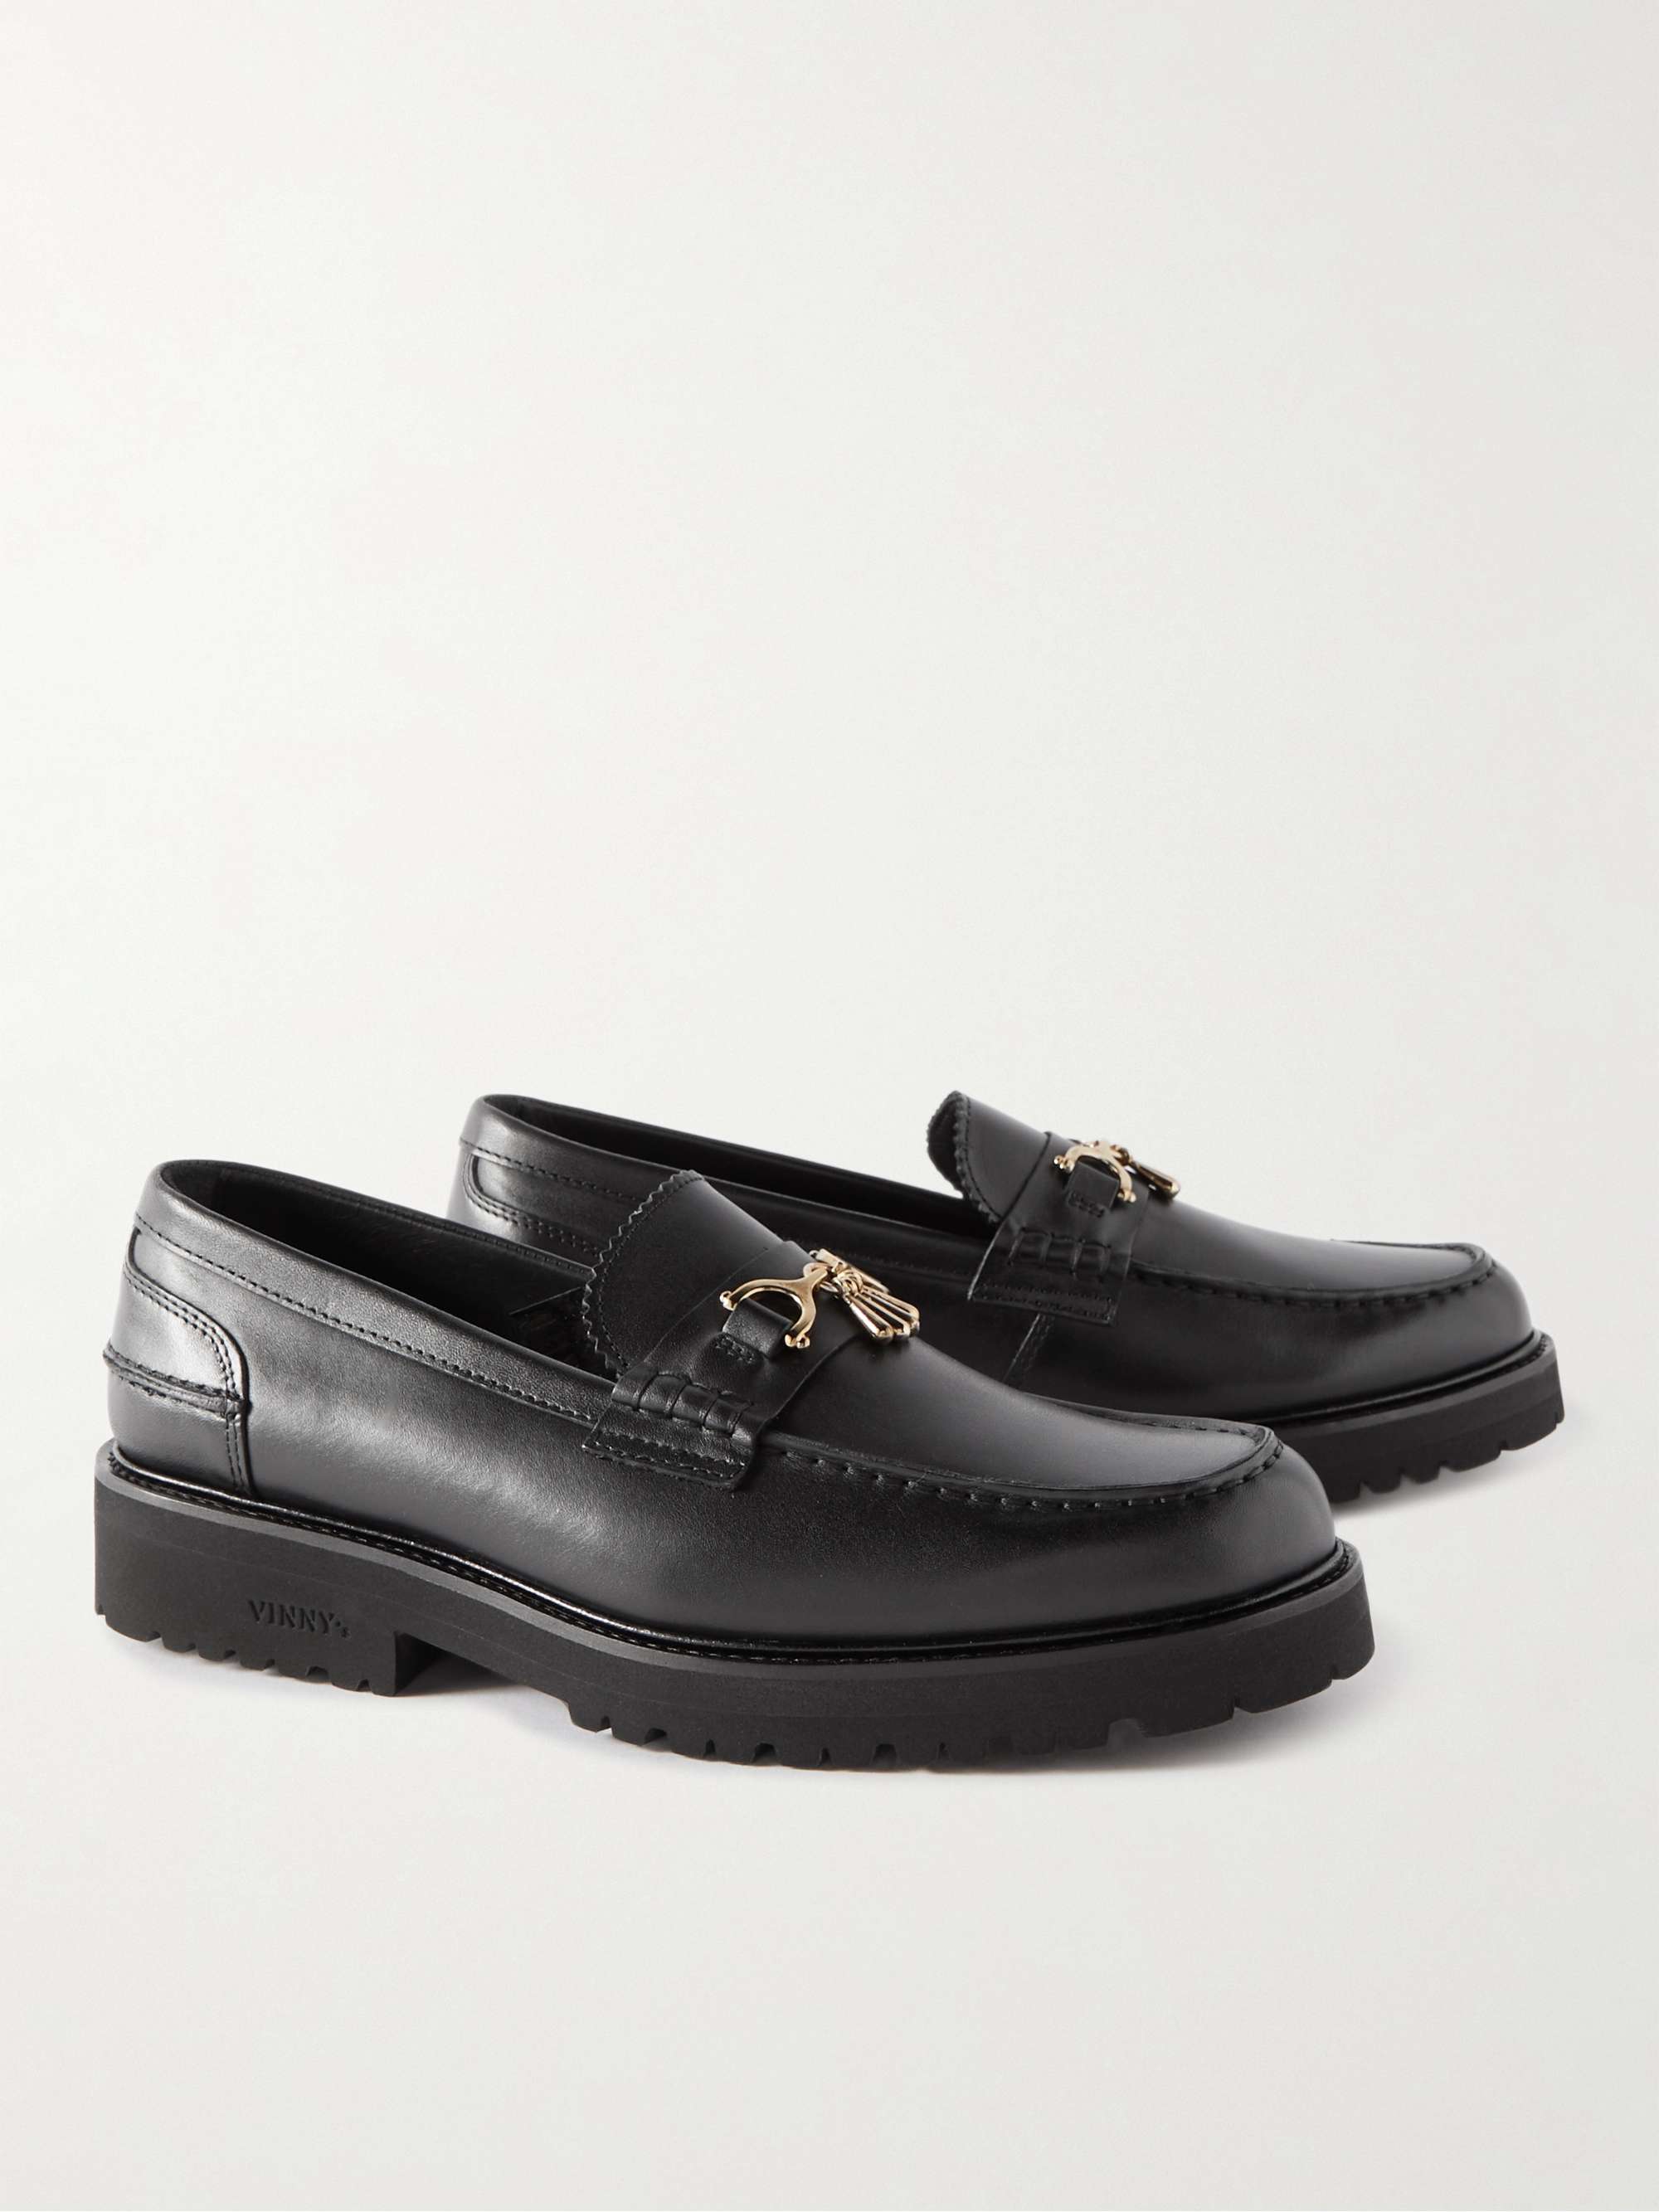 VINNY'S Palace Leather Loafers